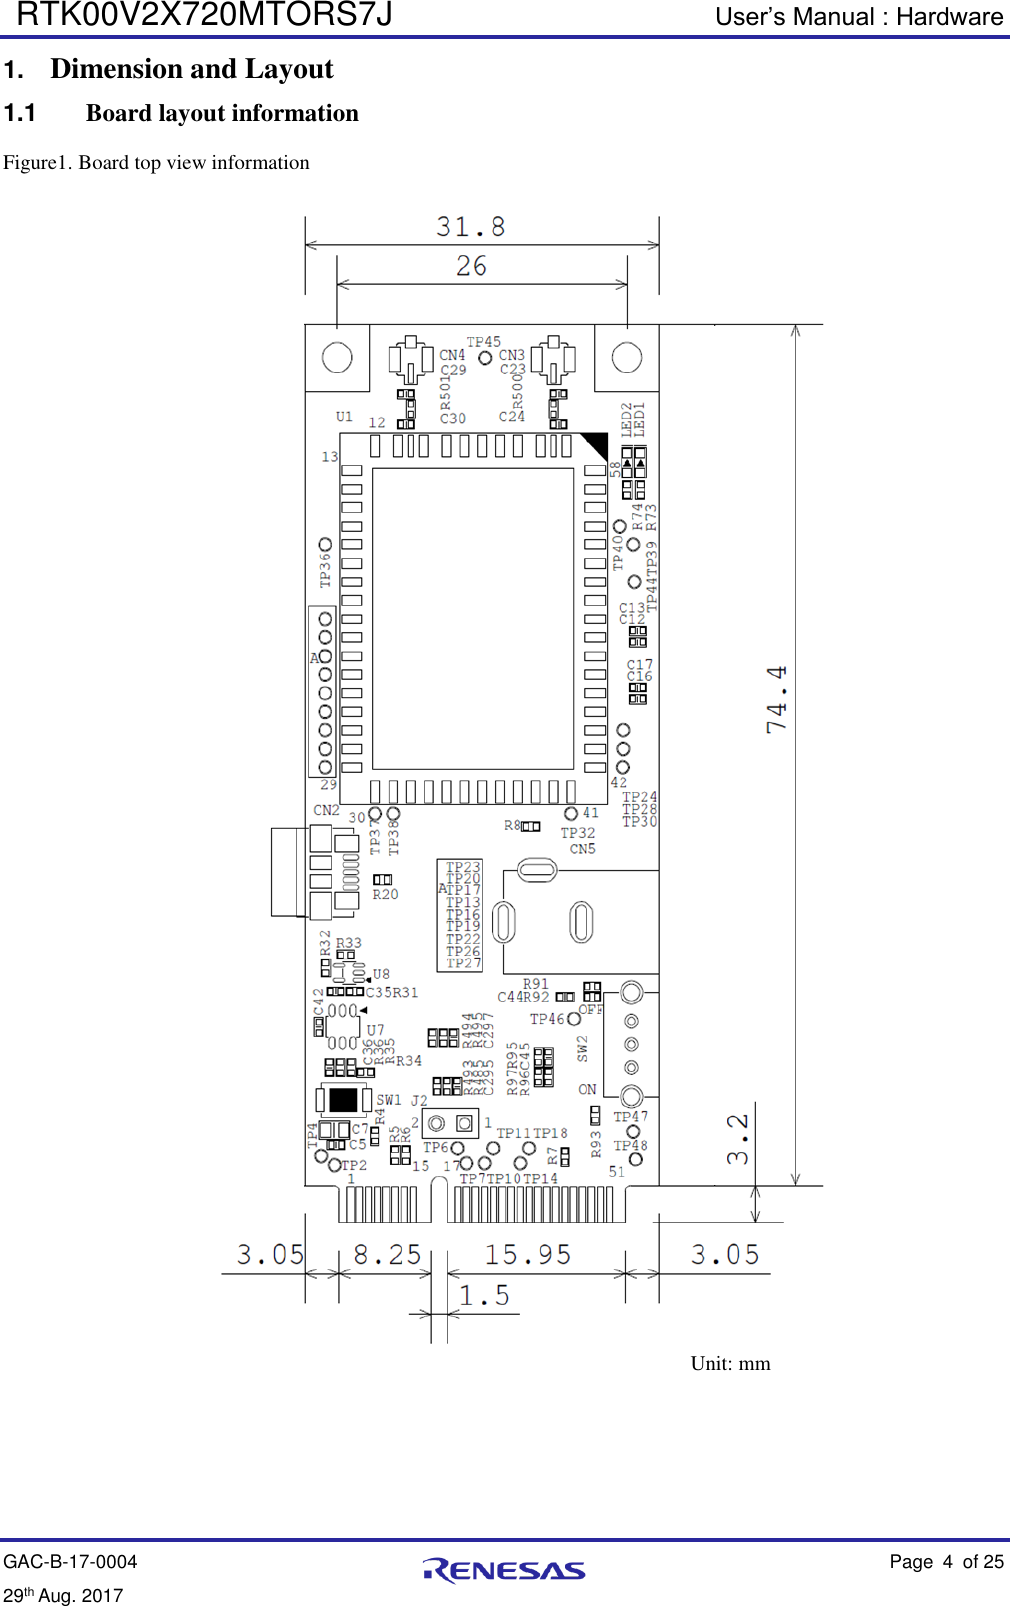  RTK00V2X720MTORS7J User’s Manual : Hardware GAC-B-17-0004    Page 4  of 25 29th Aug. 2017   1. Dimension and Layout  1.1  Board layout information  Figure1. Board top view information    Unit: mm    